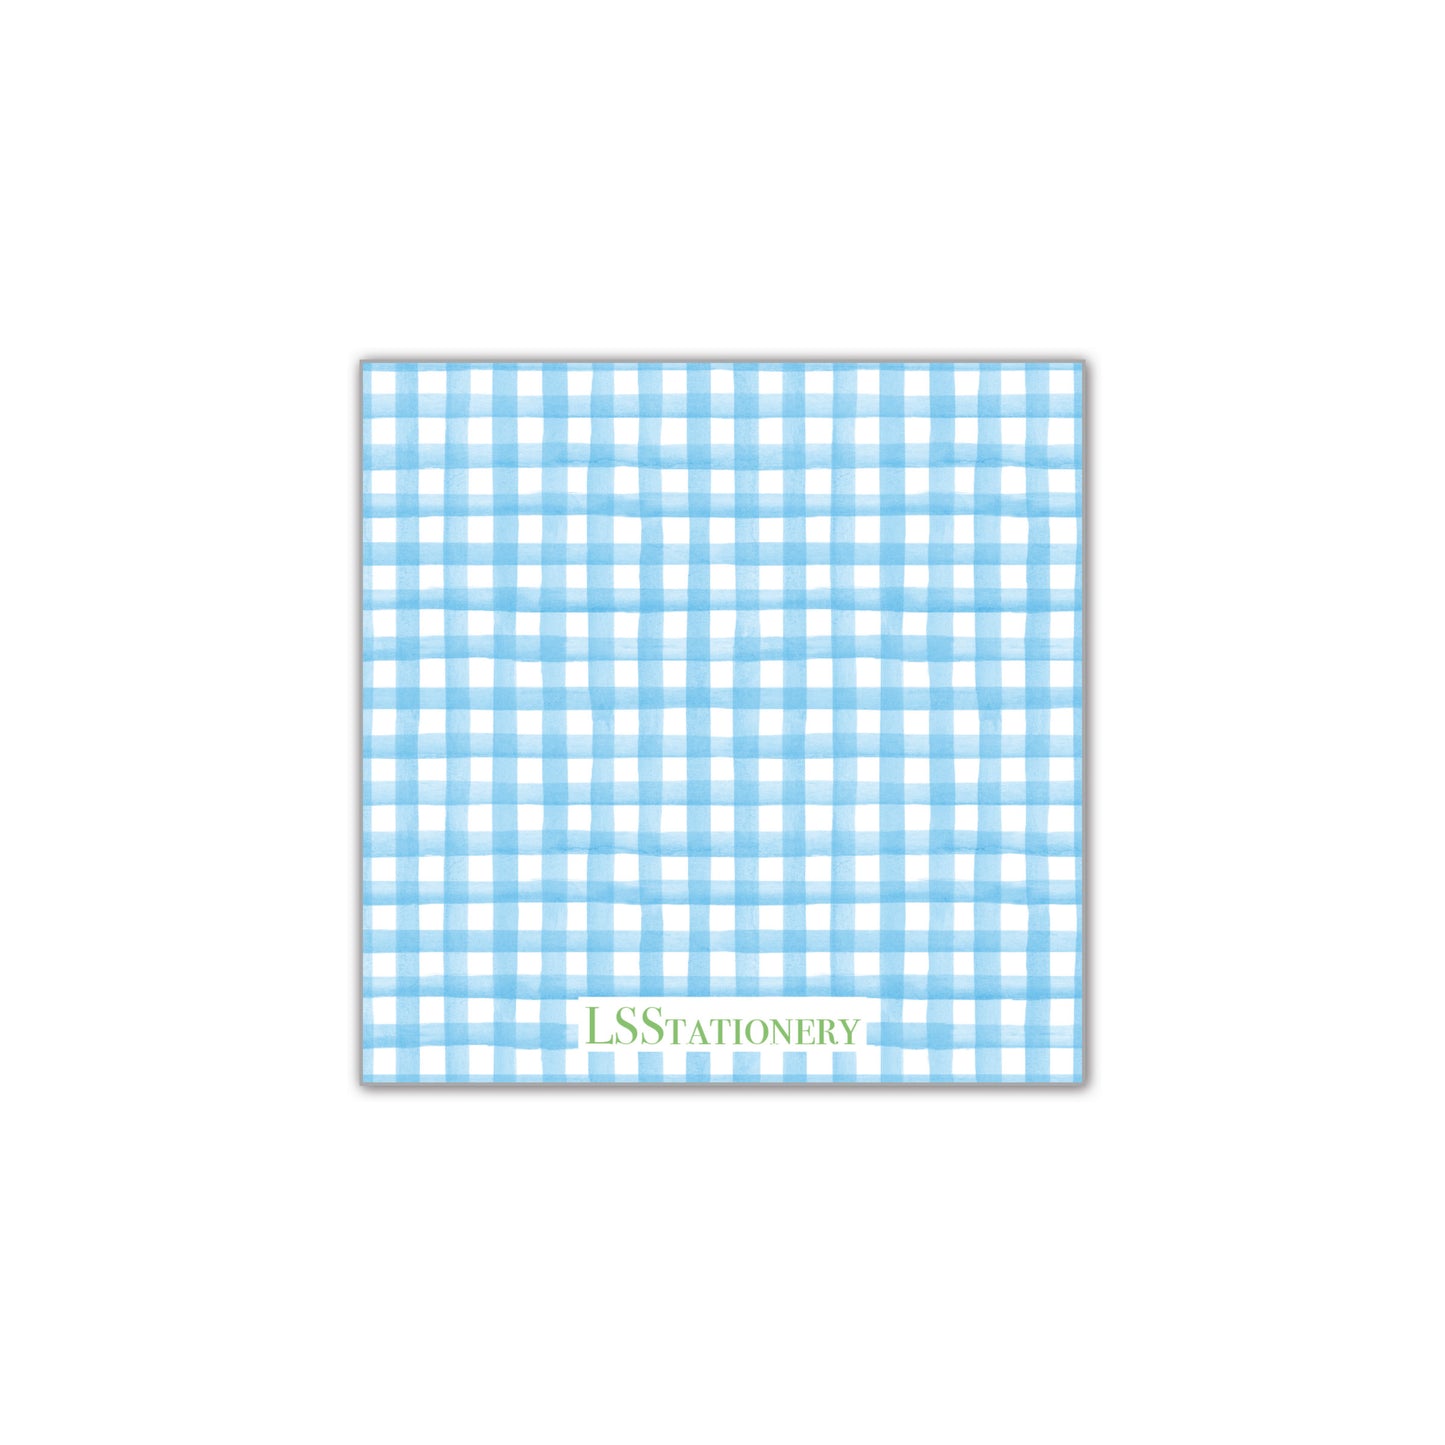 Ex-Straw - green font gingham Gift Tag